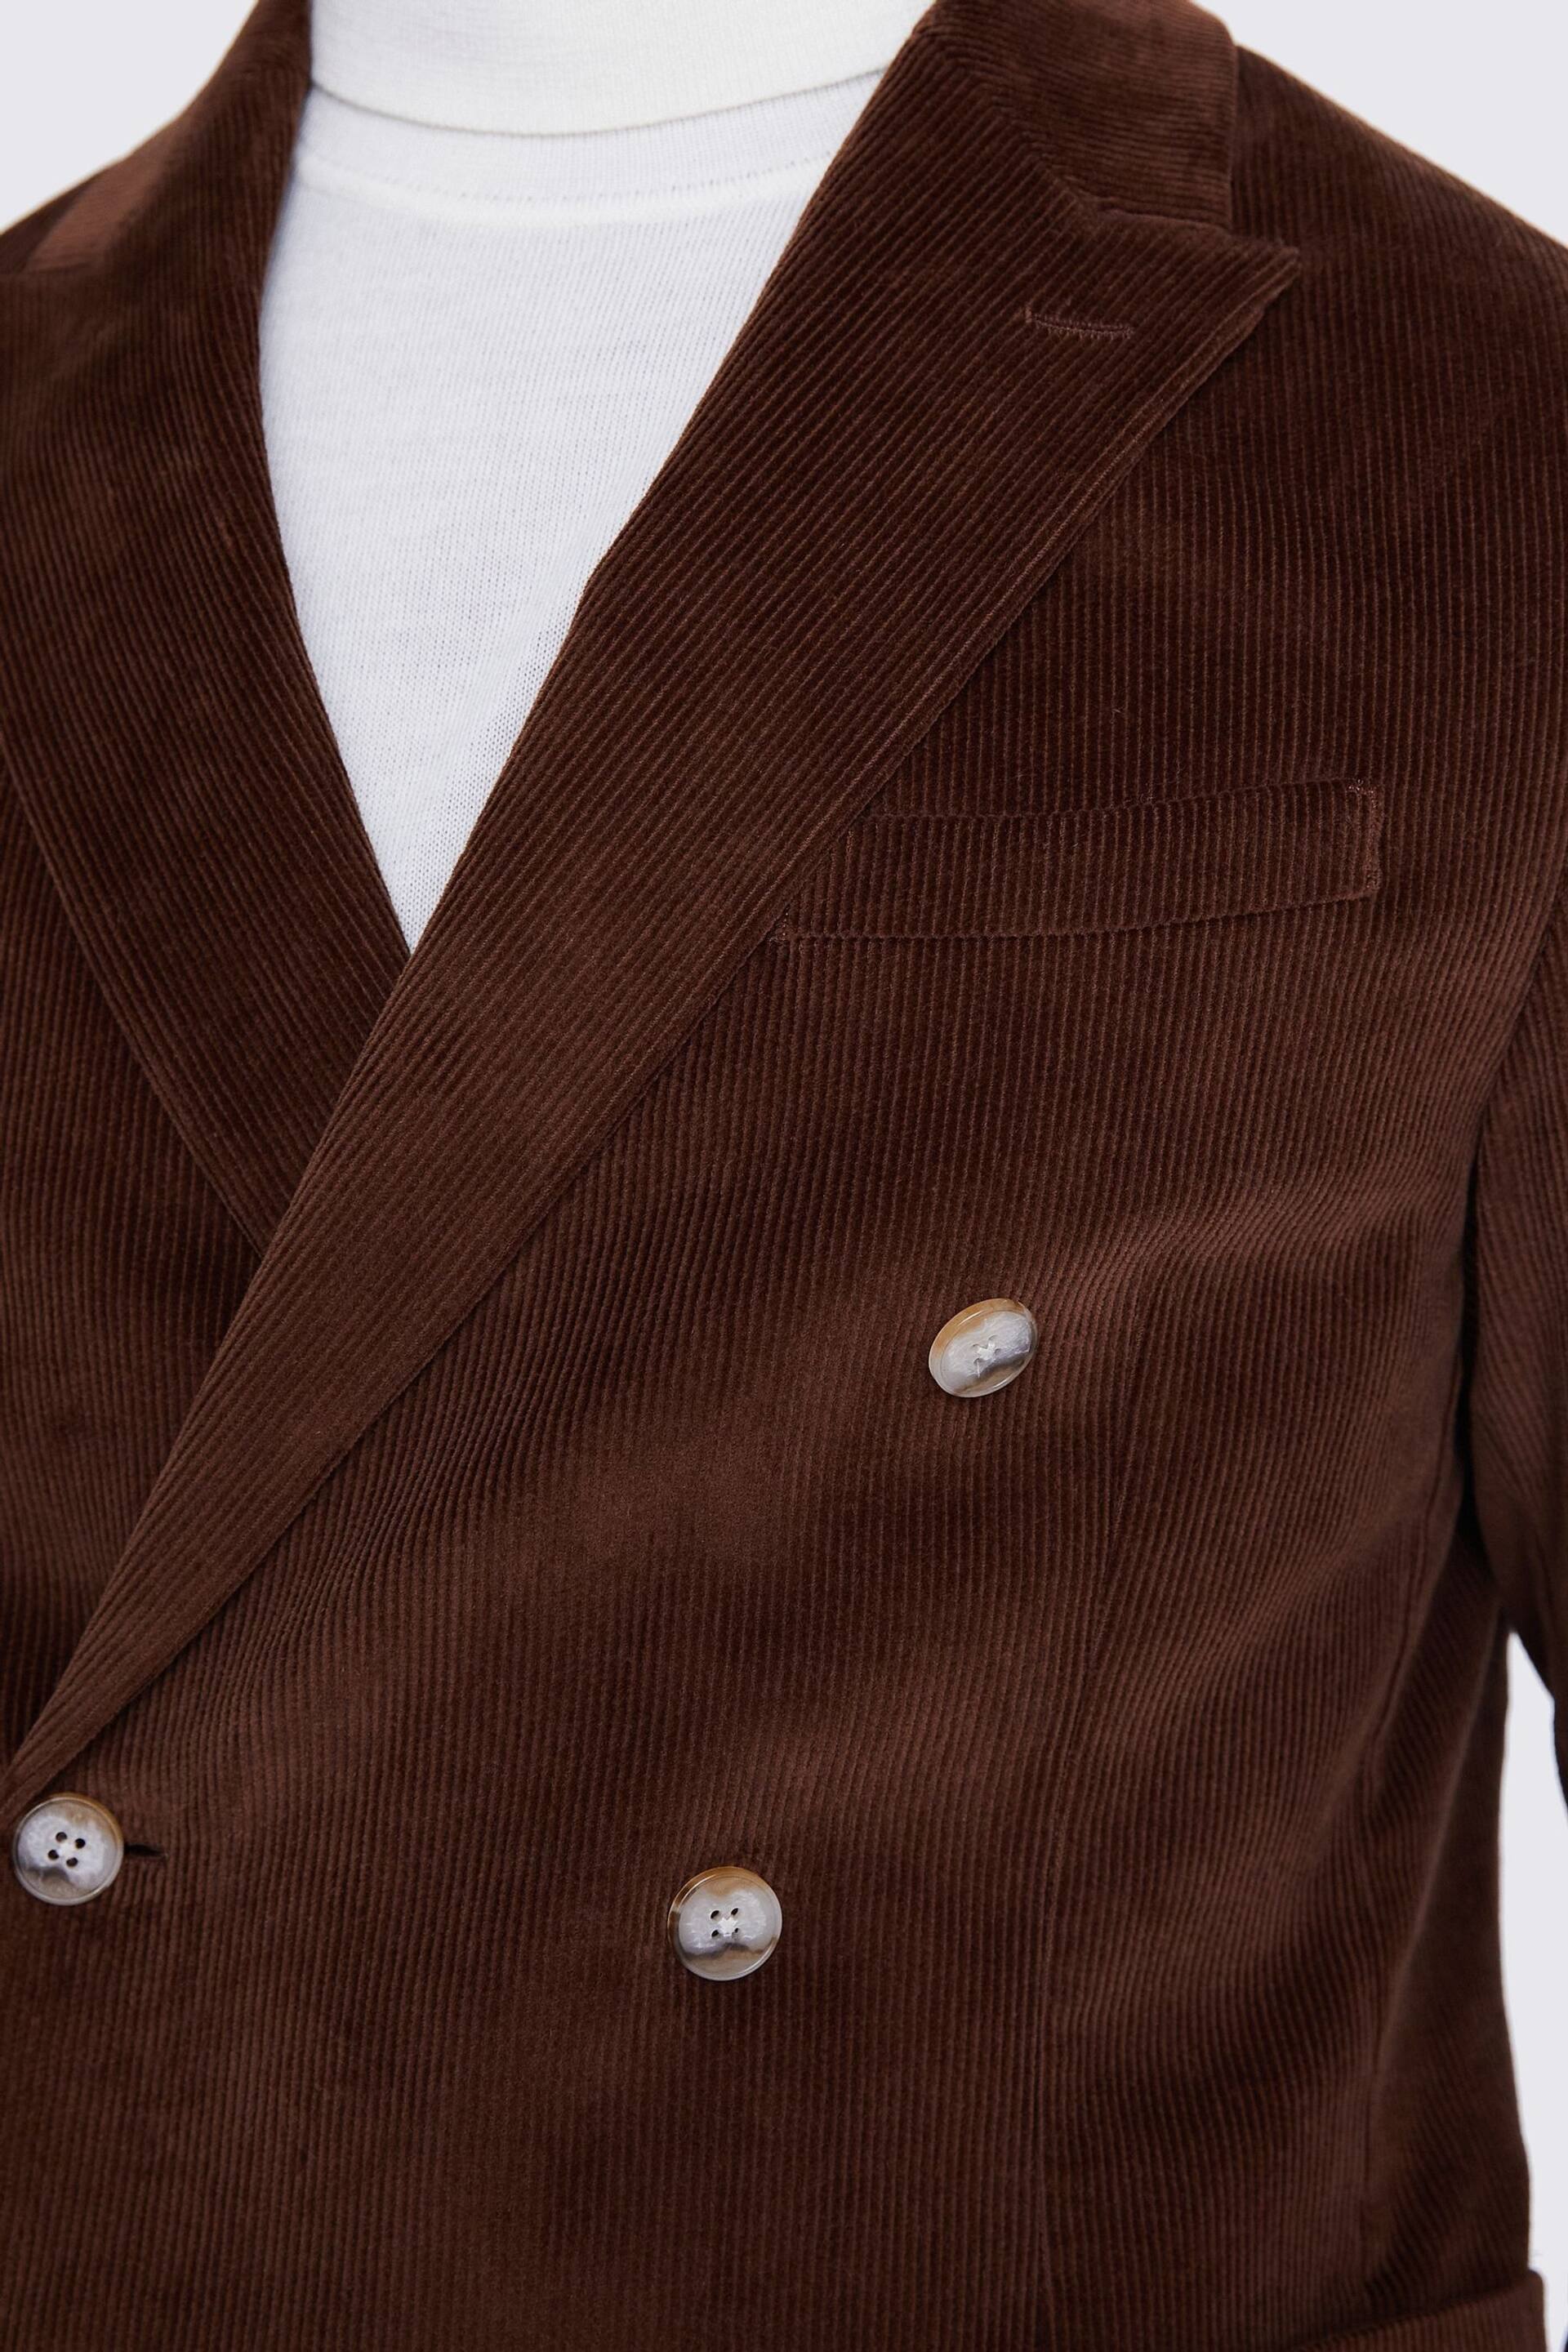 MOSS Slim Fit Copper Corduroy Brown Jacket - Image 5 of 6